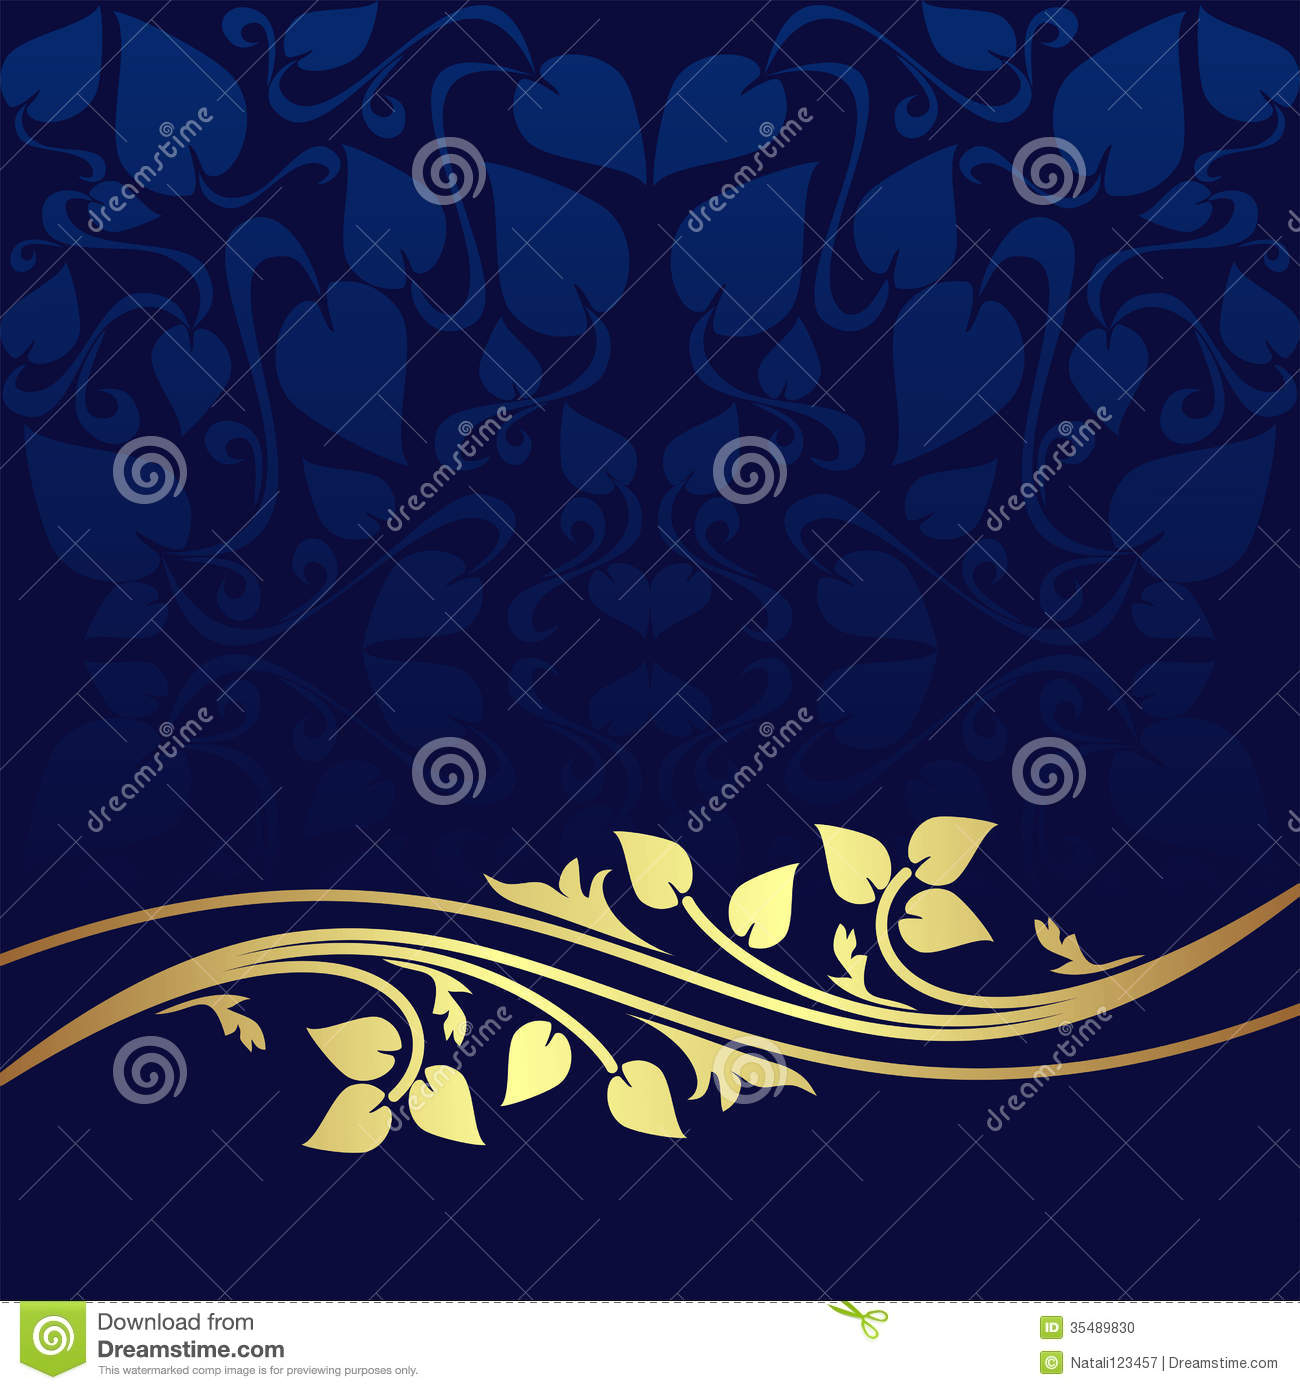 Free download Navy Blue And Gold Wallpaper Gold backgroun [1300x1390 ...